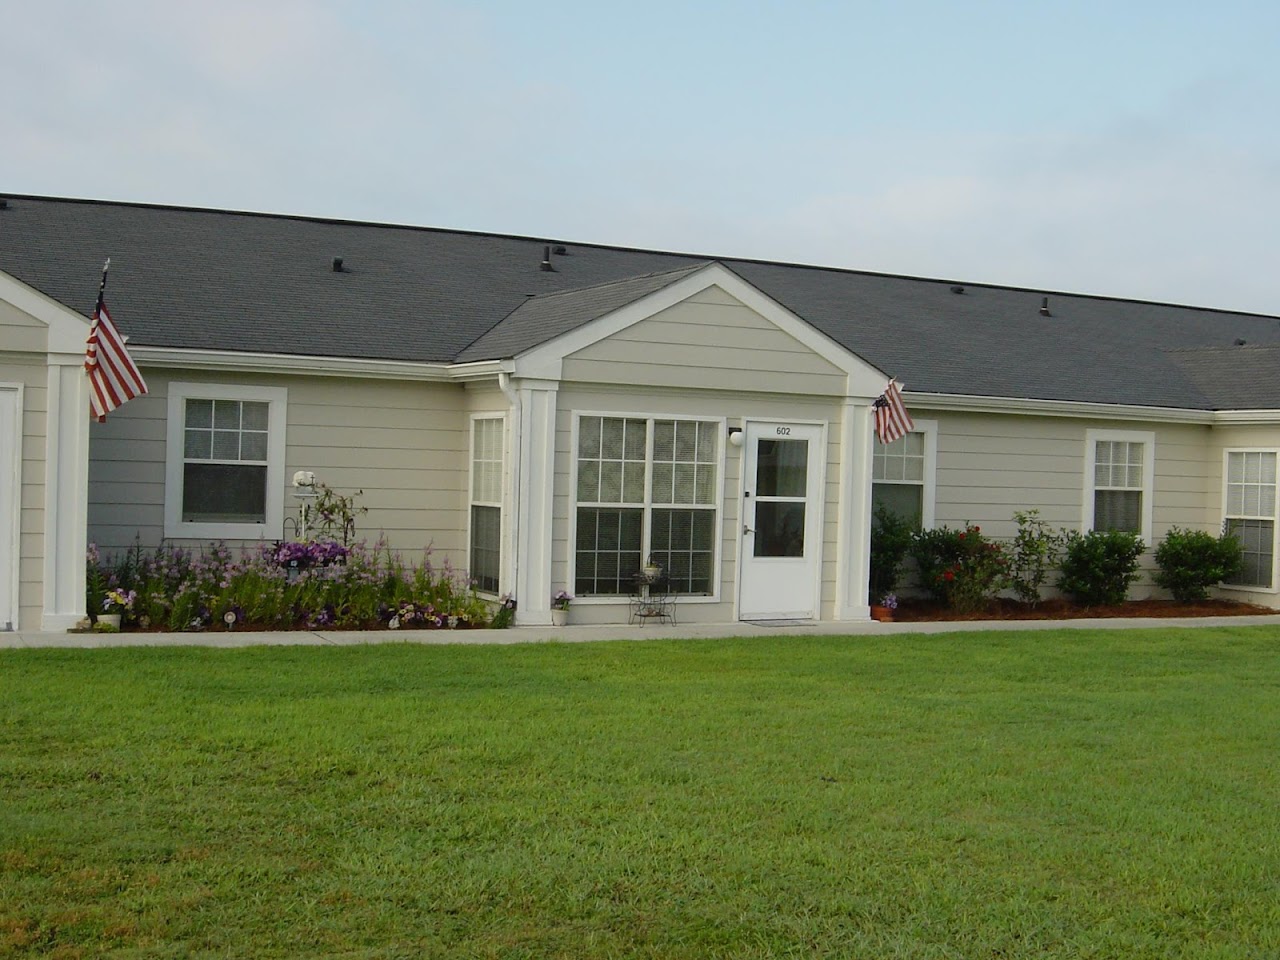 Photo of TIMBERLAND CROSSING APTS at 103 WHISPERING MAPLE DR CENTRAL, SC 29630